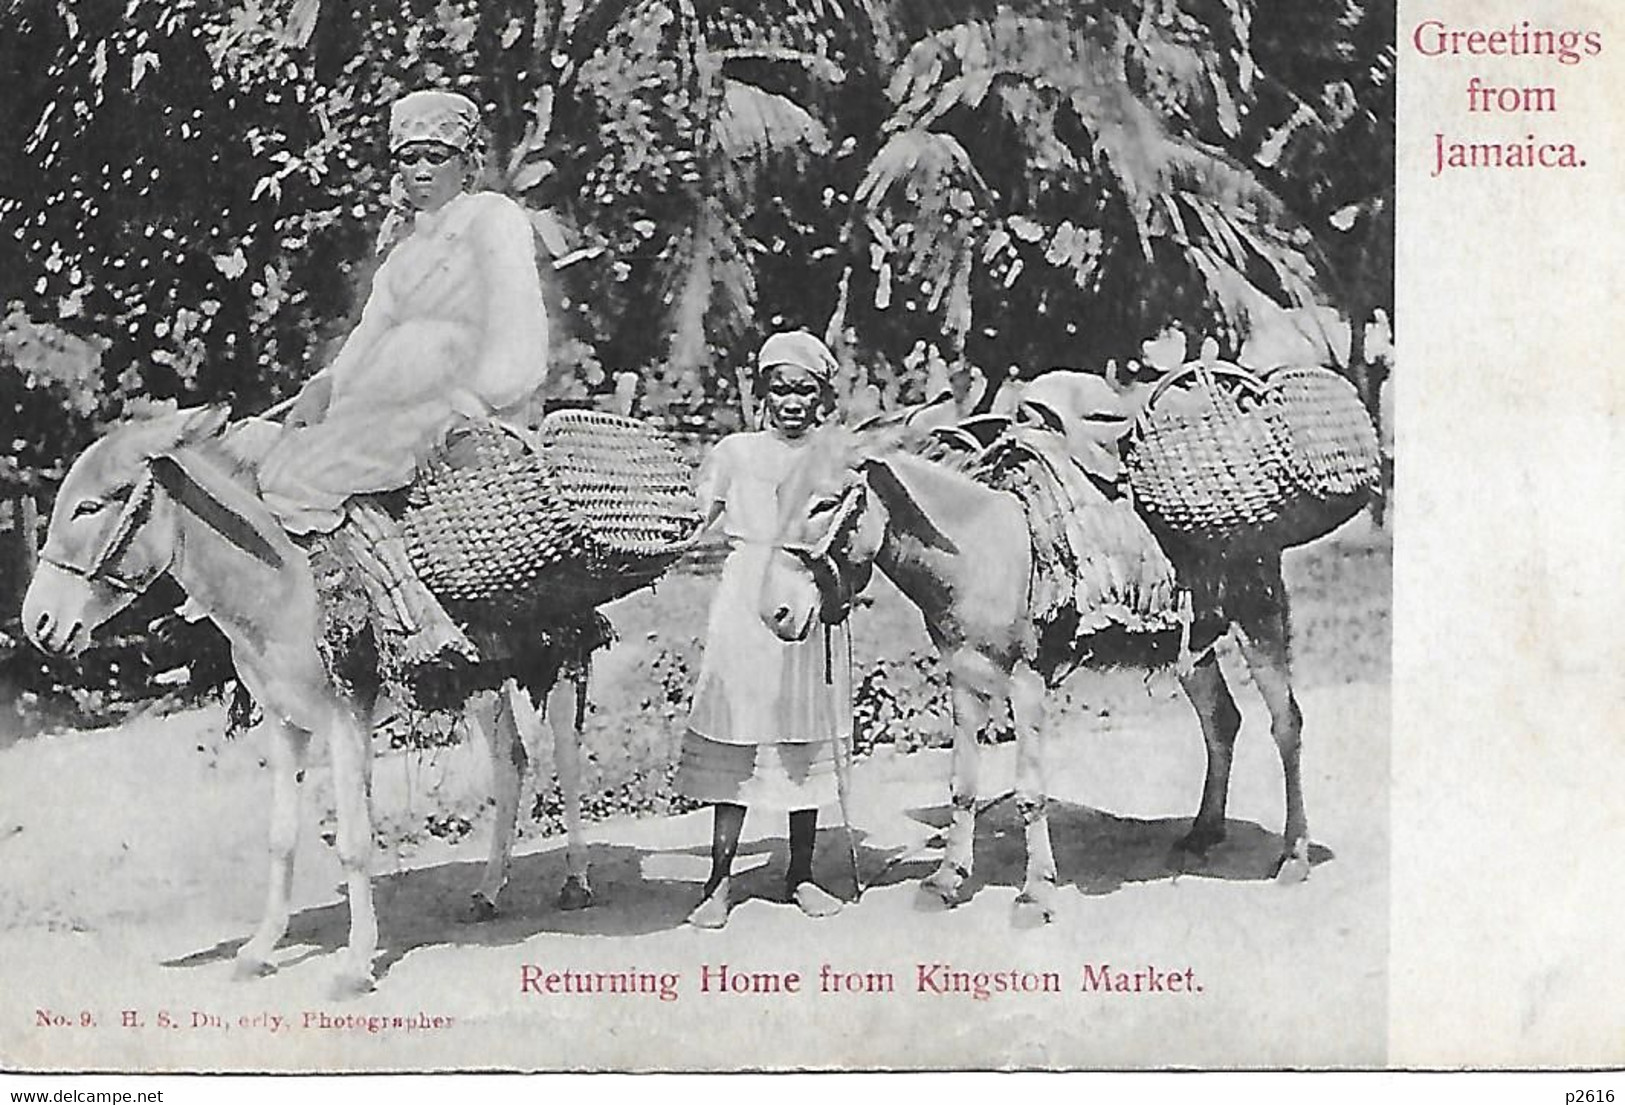 JAMAIQUE -  1907 -  GREETINGS FROM JAMAICA -  RETURNING HOME FROM KINGSTON MARKET - Jamaica